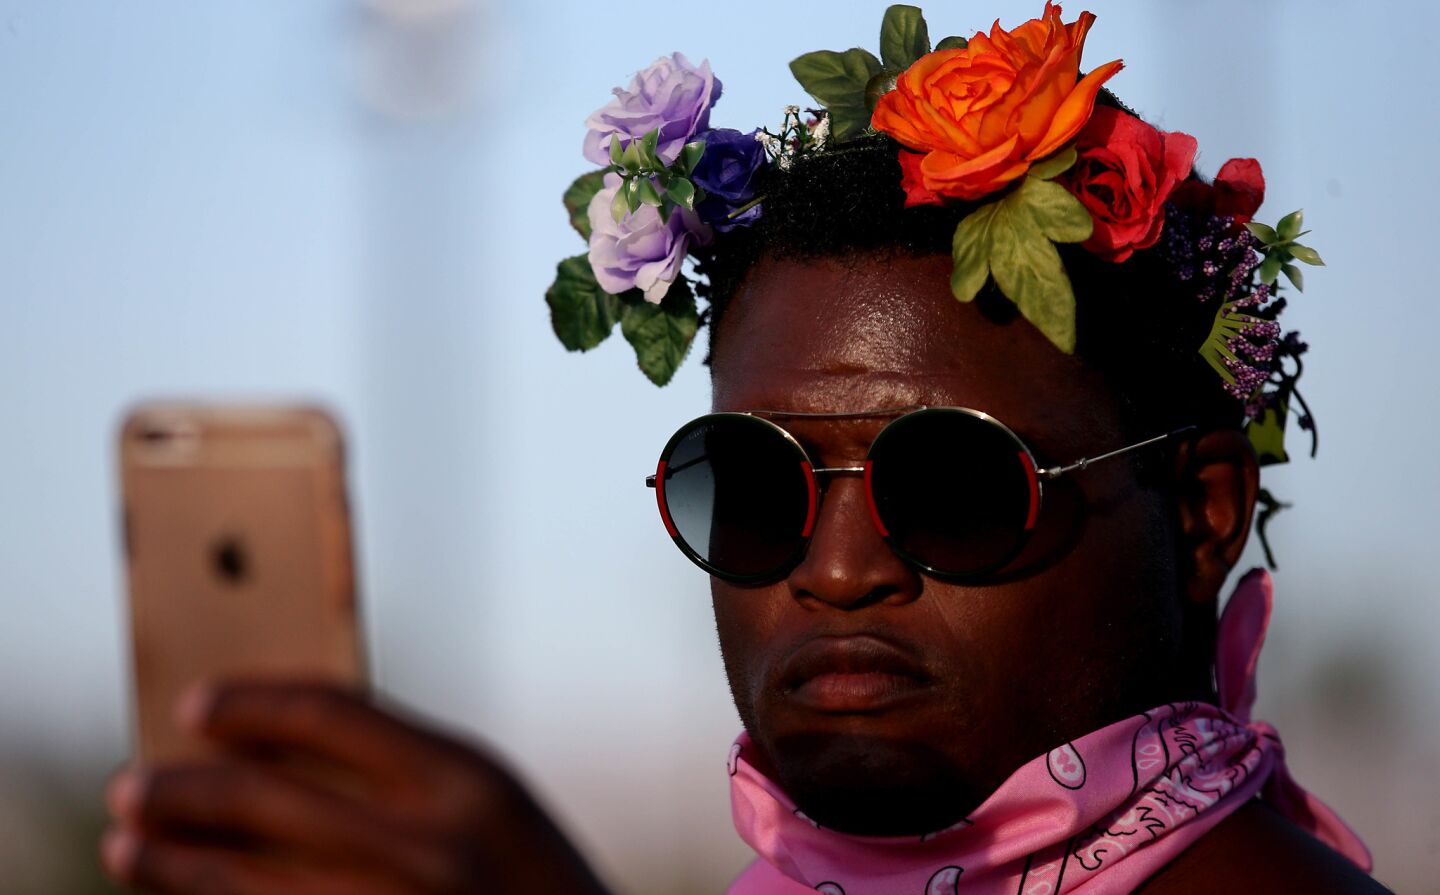 INDIO, CALIF. - APRIL 15, 2017. A festival goer takes a selfie while waiting for a performance by Future on the Coachella Stage on day two of the Coachella Music and Arts Festival in Indio on Saturday, April 15, 2017. (Luis Sinco/Los Angeles Times)